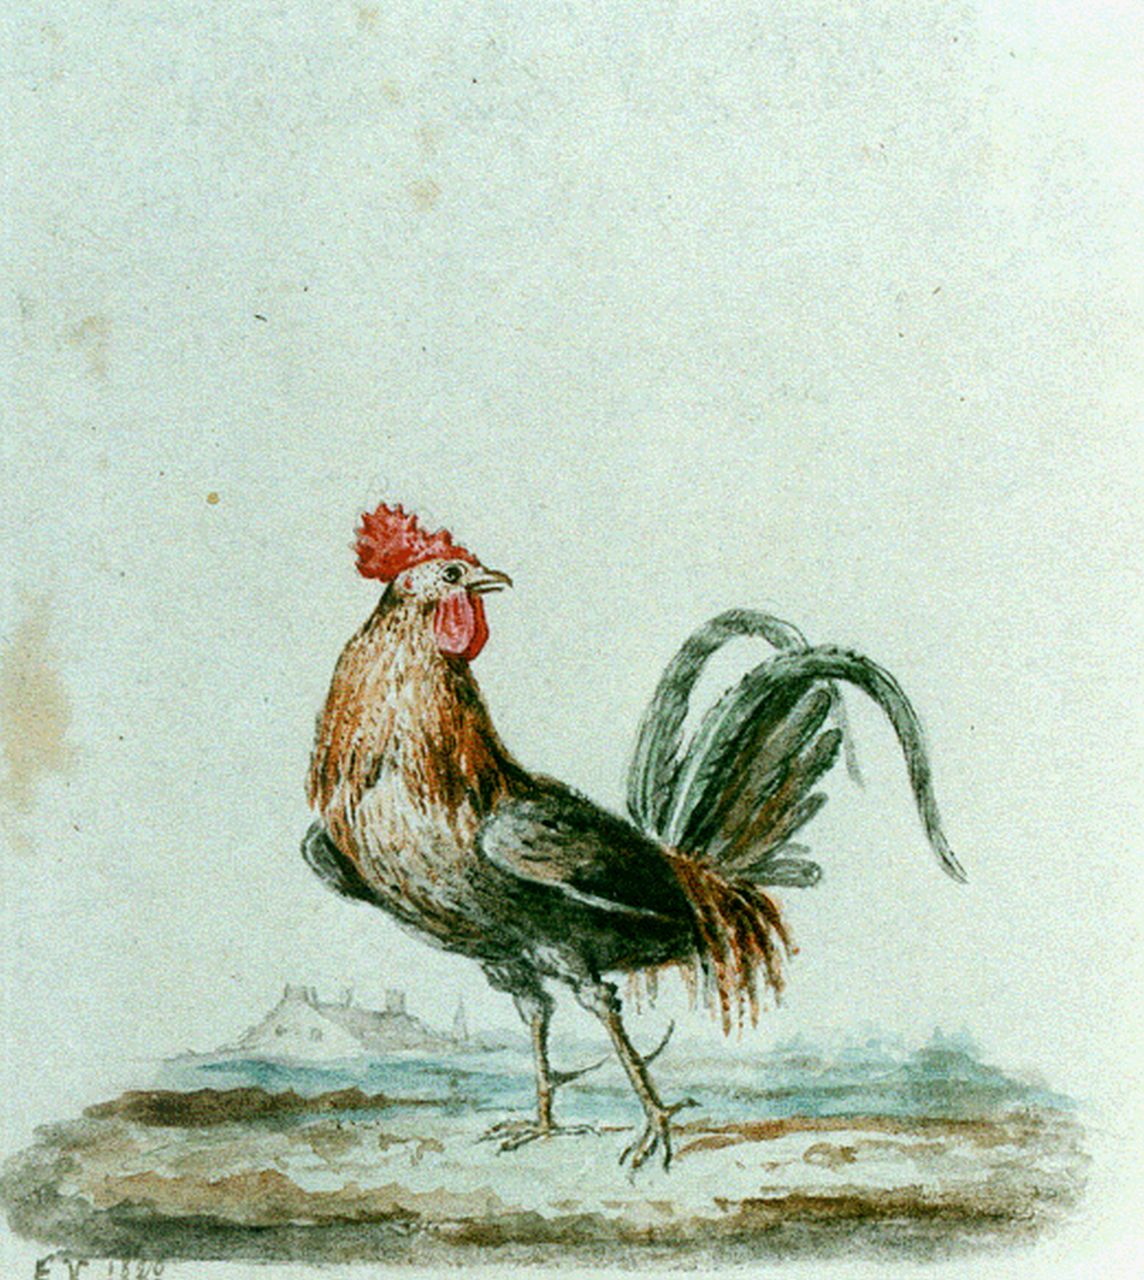 Verboeckhoven E.J.  | Eugène Joseph Verboeckhoven, Rooster, watercolour on paper 6.5 x 6.0 cm, signed l.l. with monogram and dated 1928